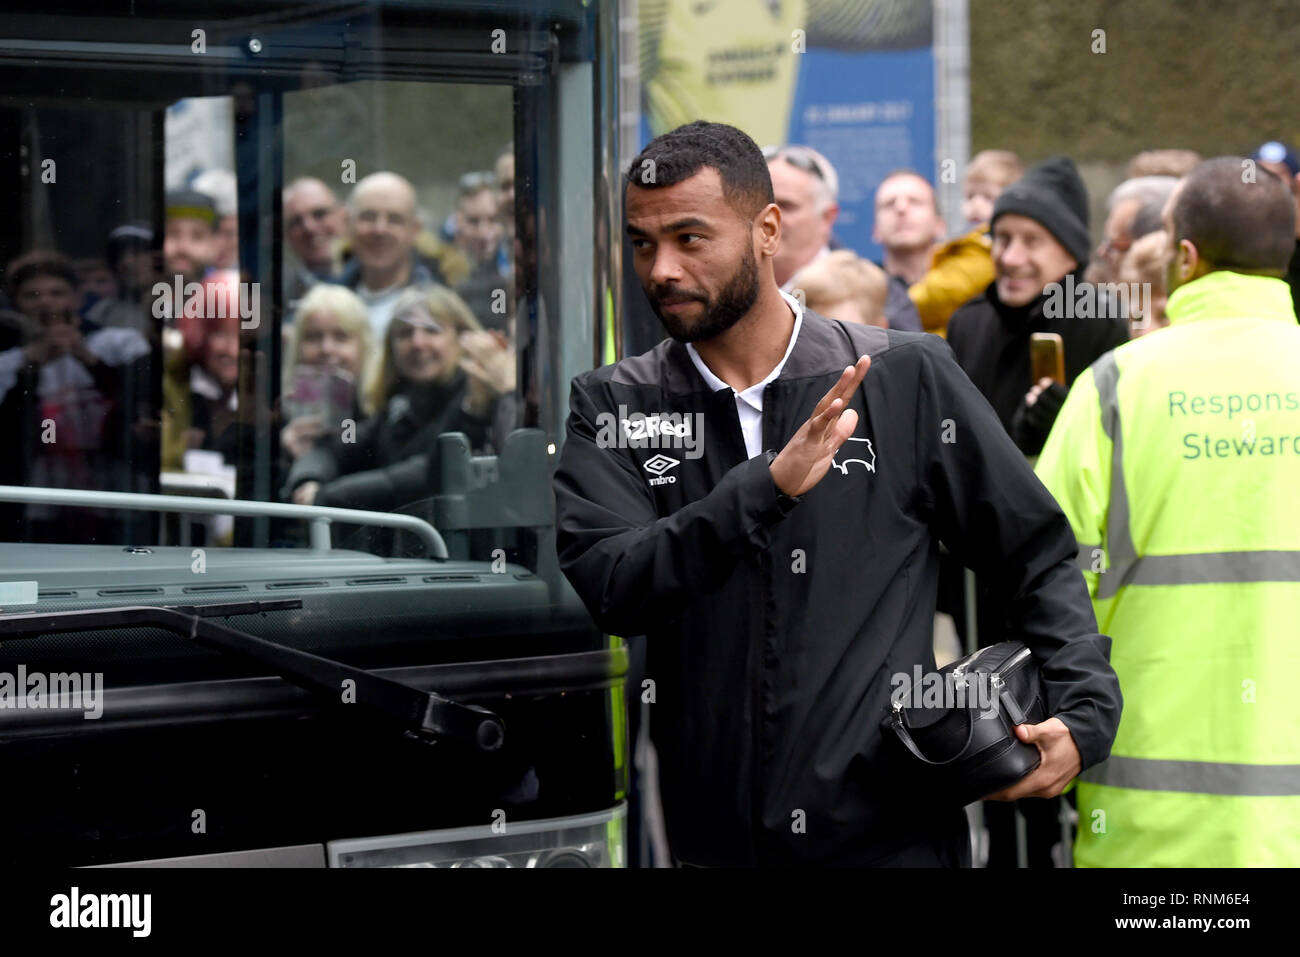 Ashley Cole of Derby arrives for the FA Cup 5th round match between Brighton & Hove Albion and Derby County at the American Express Community Stadium . 16 February 2019 Editorial use only. No merchandising. For Football images FA and Premier League restrictions apply inc. no internet/mobile usage without FAPL license - for details contact Football Dataco Stock Photo